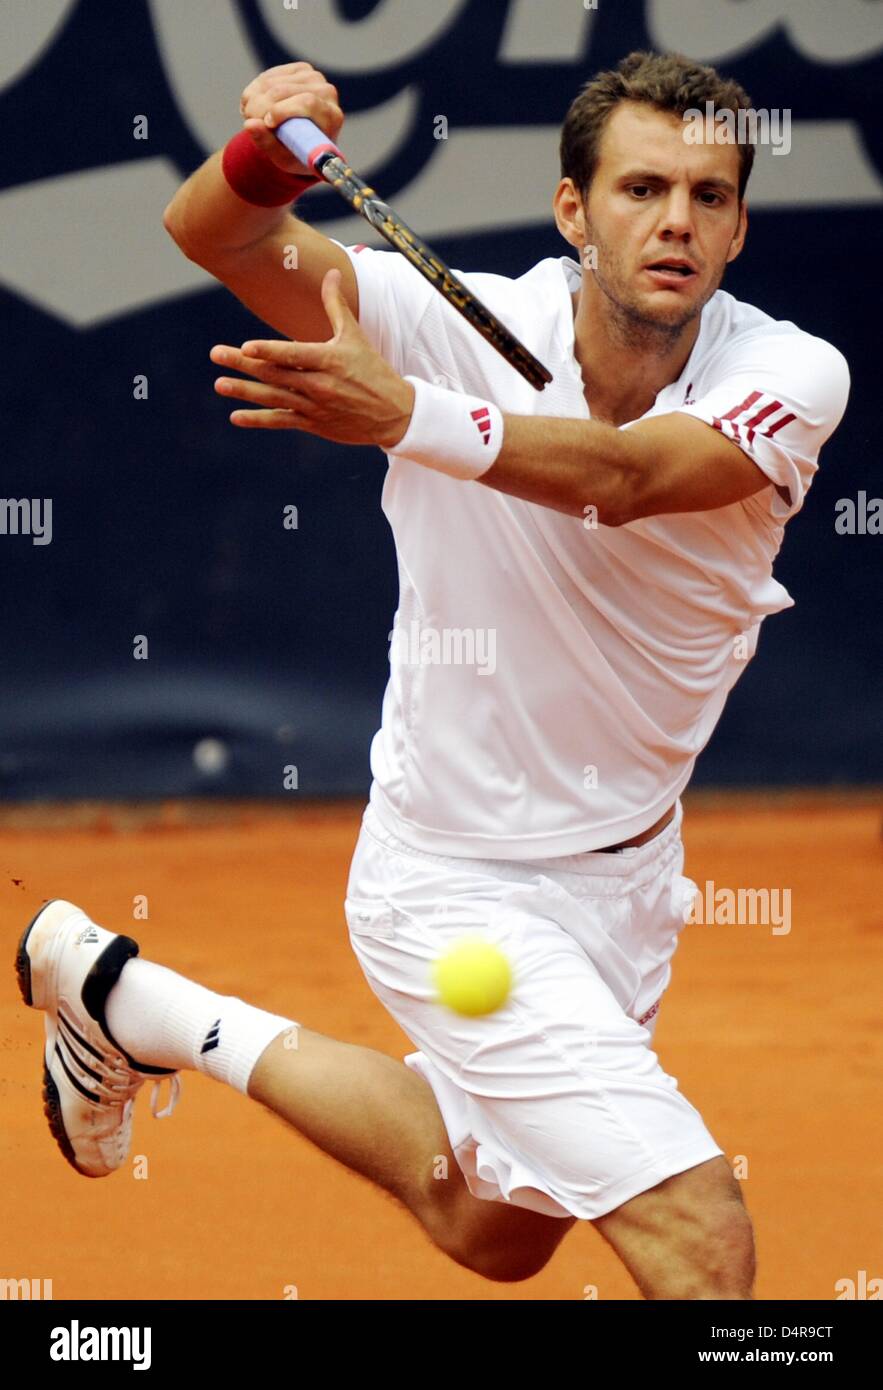 France?s Paul-Henri Mathieu returns a forehand to Serbia?s Viktor Troicki during their quarter-finals match at the German Open ?Am Rothenbaum? in Hamburg, Germany, 24 July 2009. Photo: MAURIZIO GAMBARINI Stock Photo